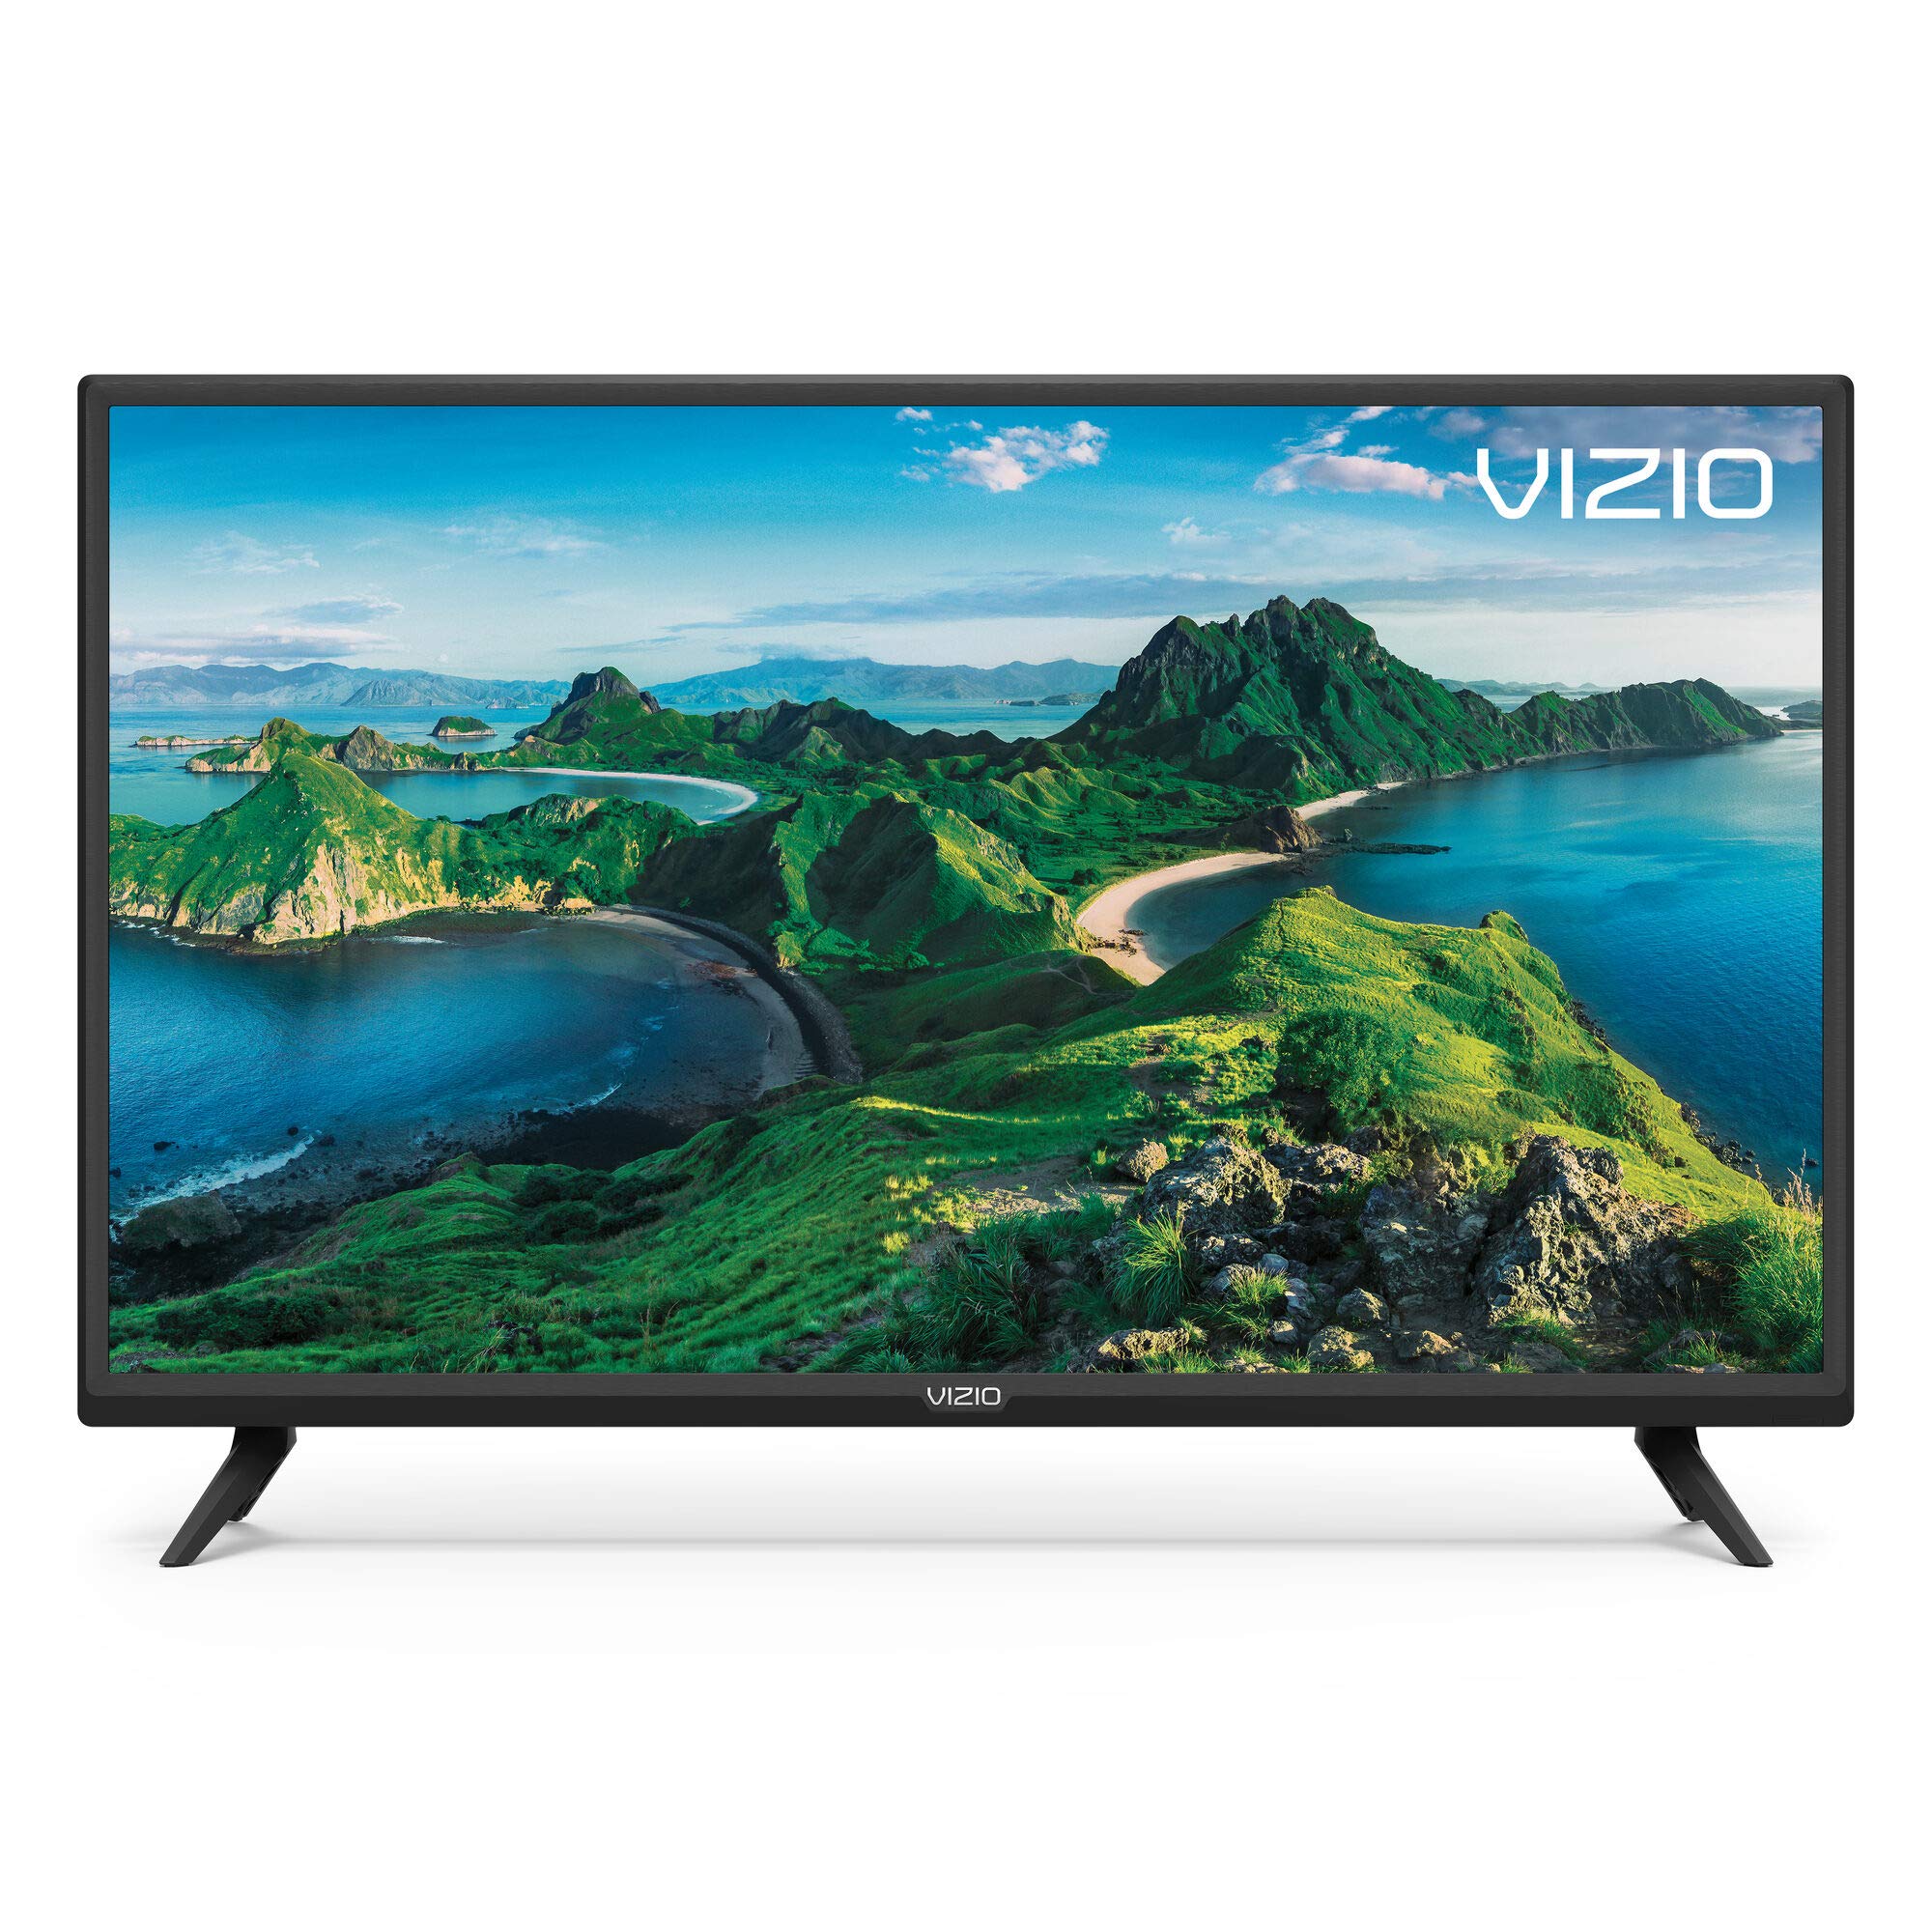 VIZIO 32-inch D-Series - Full HD 1080p Smart TV with Apple AirPlay and Chromecast Built-in, Screen Mirroring for Second Screens, & 150+ Free Streaming Channels (D32f-G61, 2020)